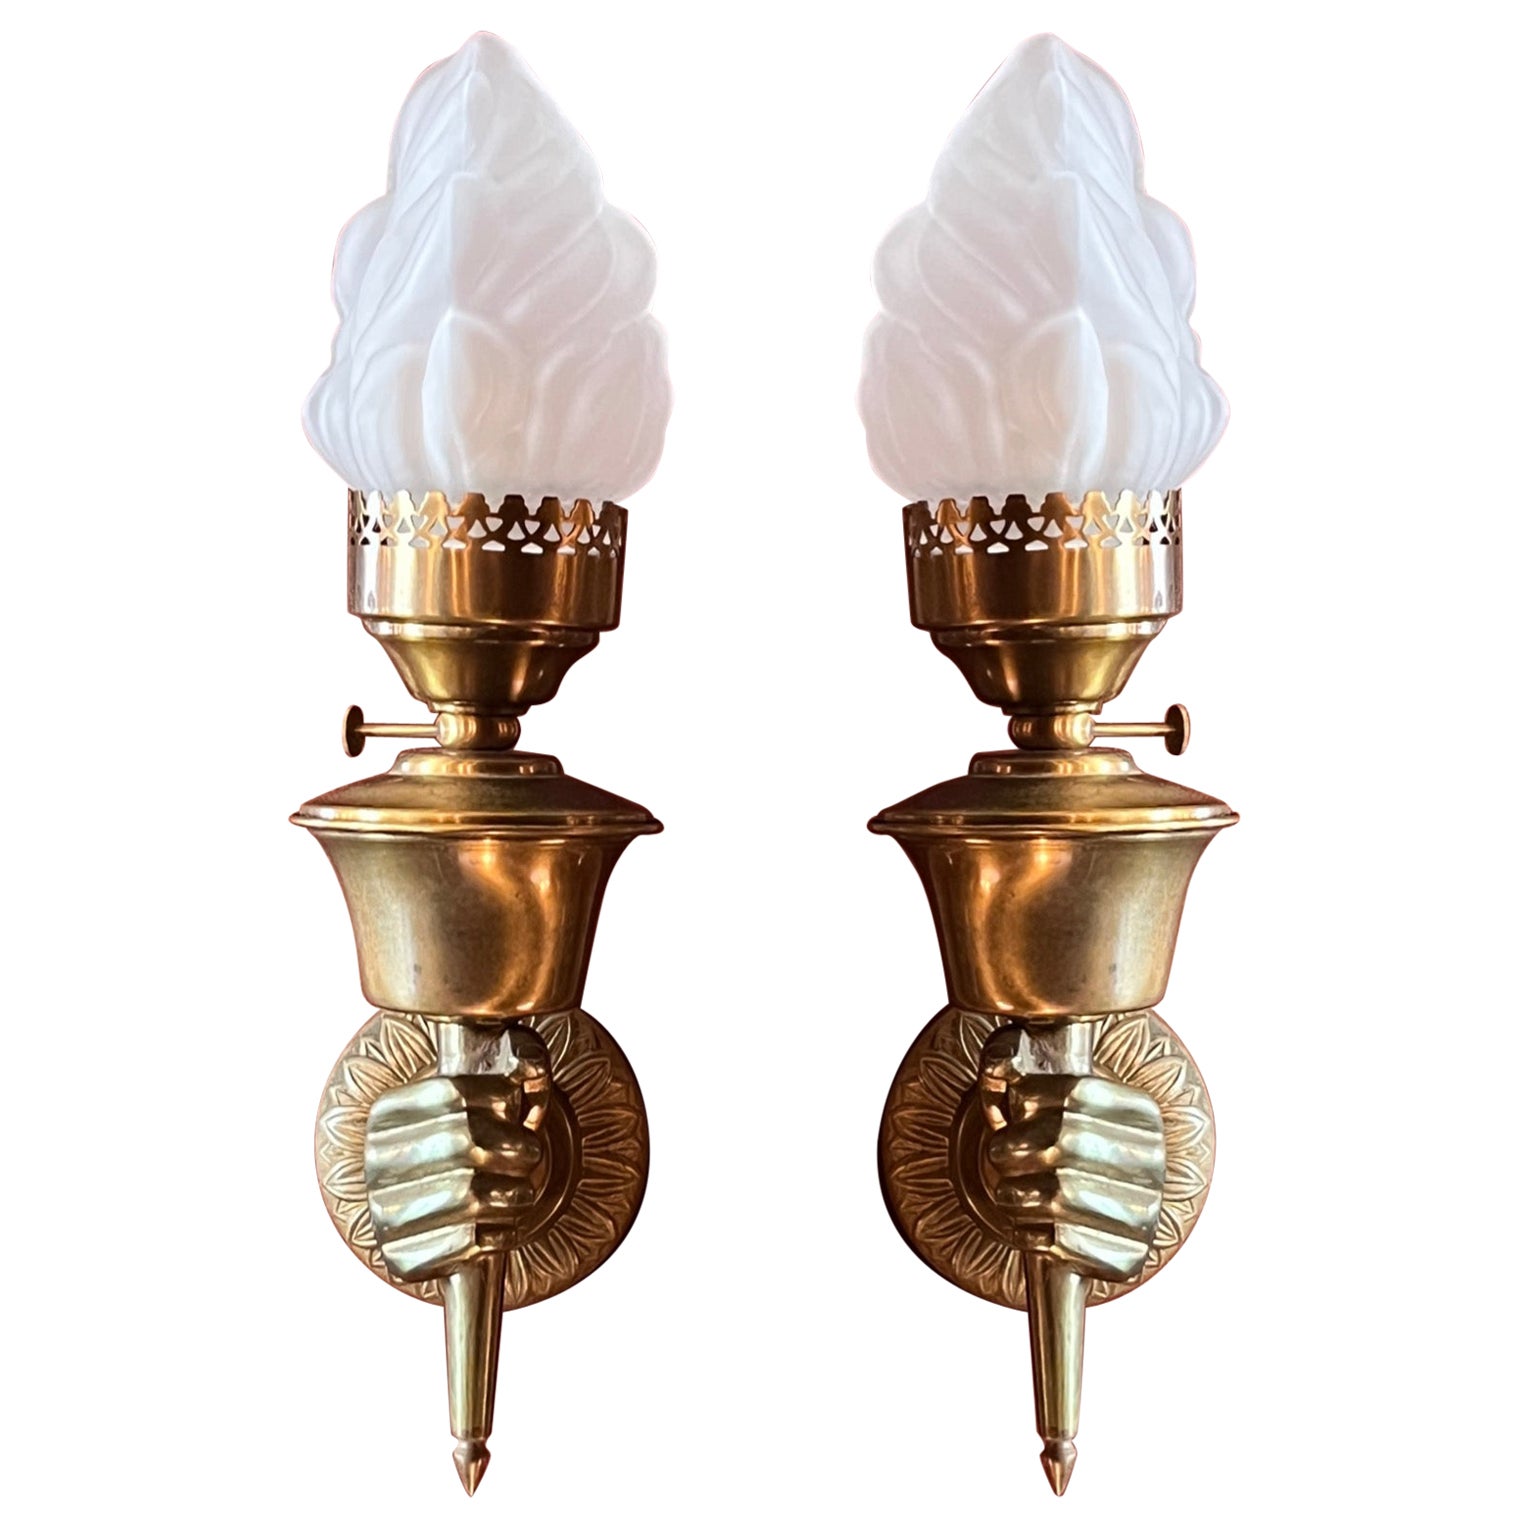 Pair Estate Brass & Glass Wall Light Sconces in Figural Hands, Circa 1940s-1950s For Sale